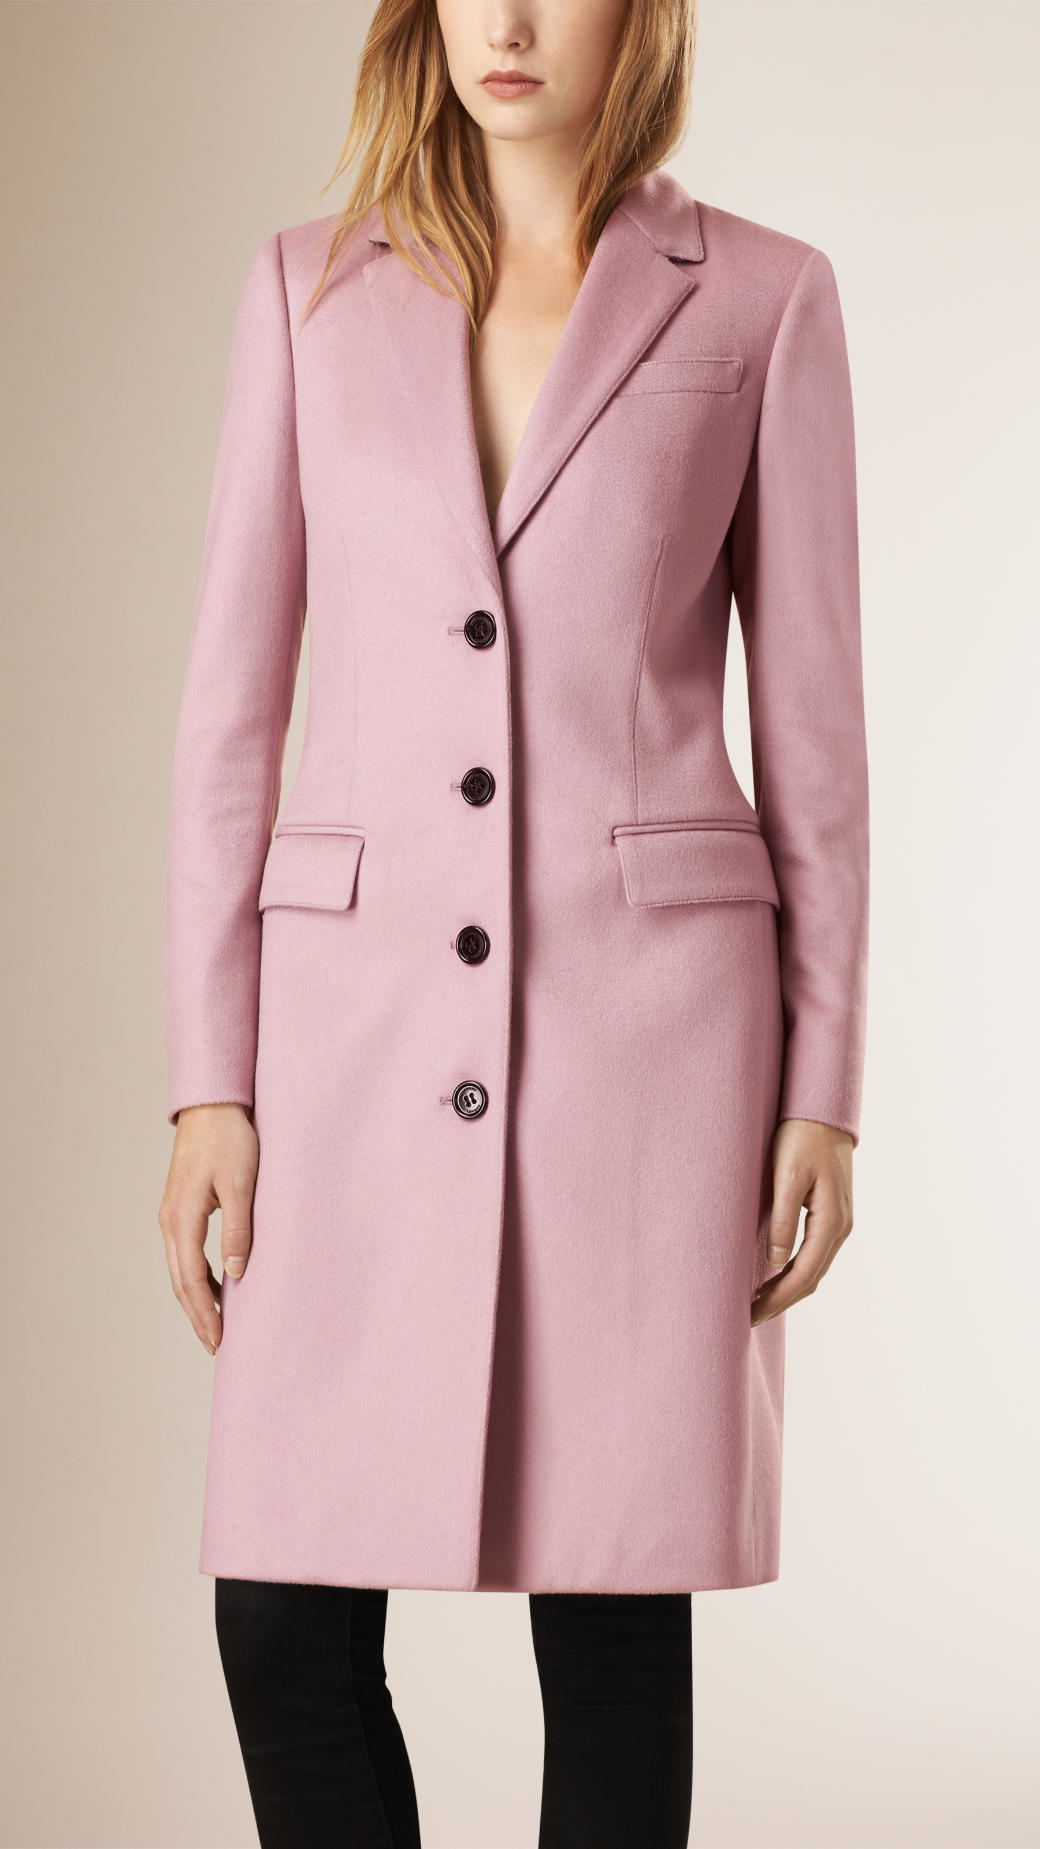 Burberry Cashmere Tailored Coat in Pink 